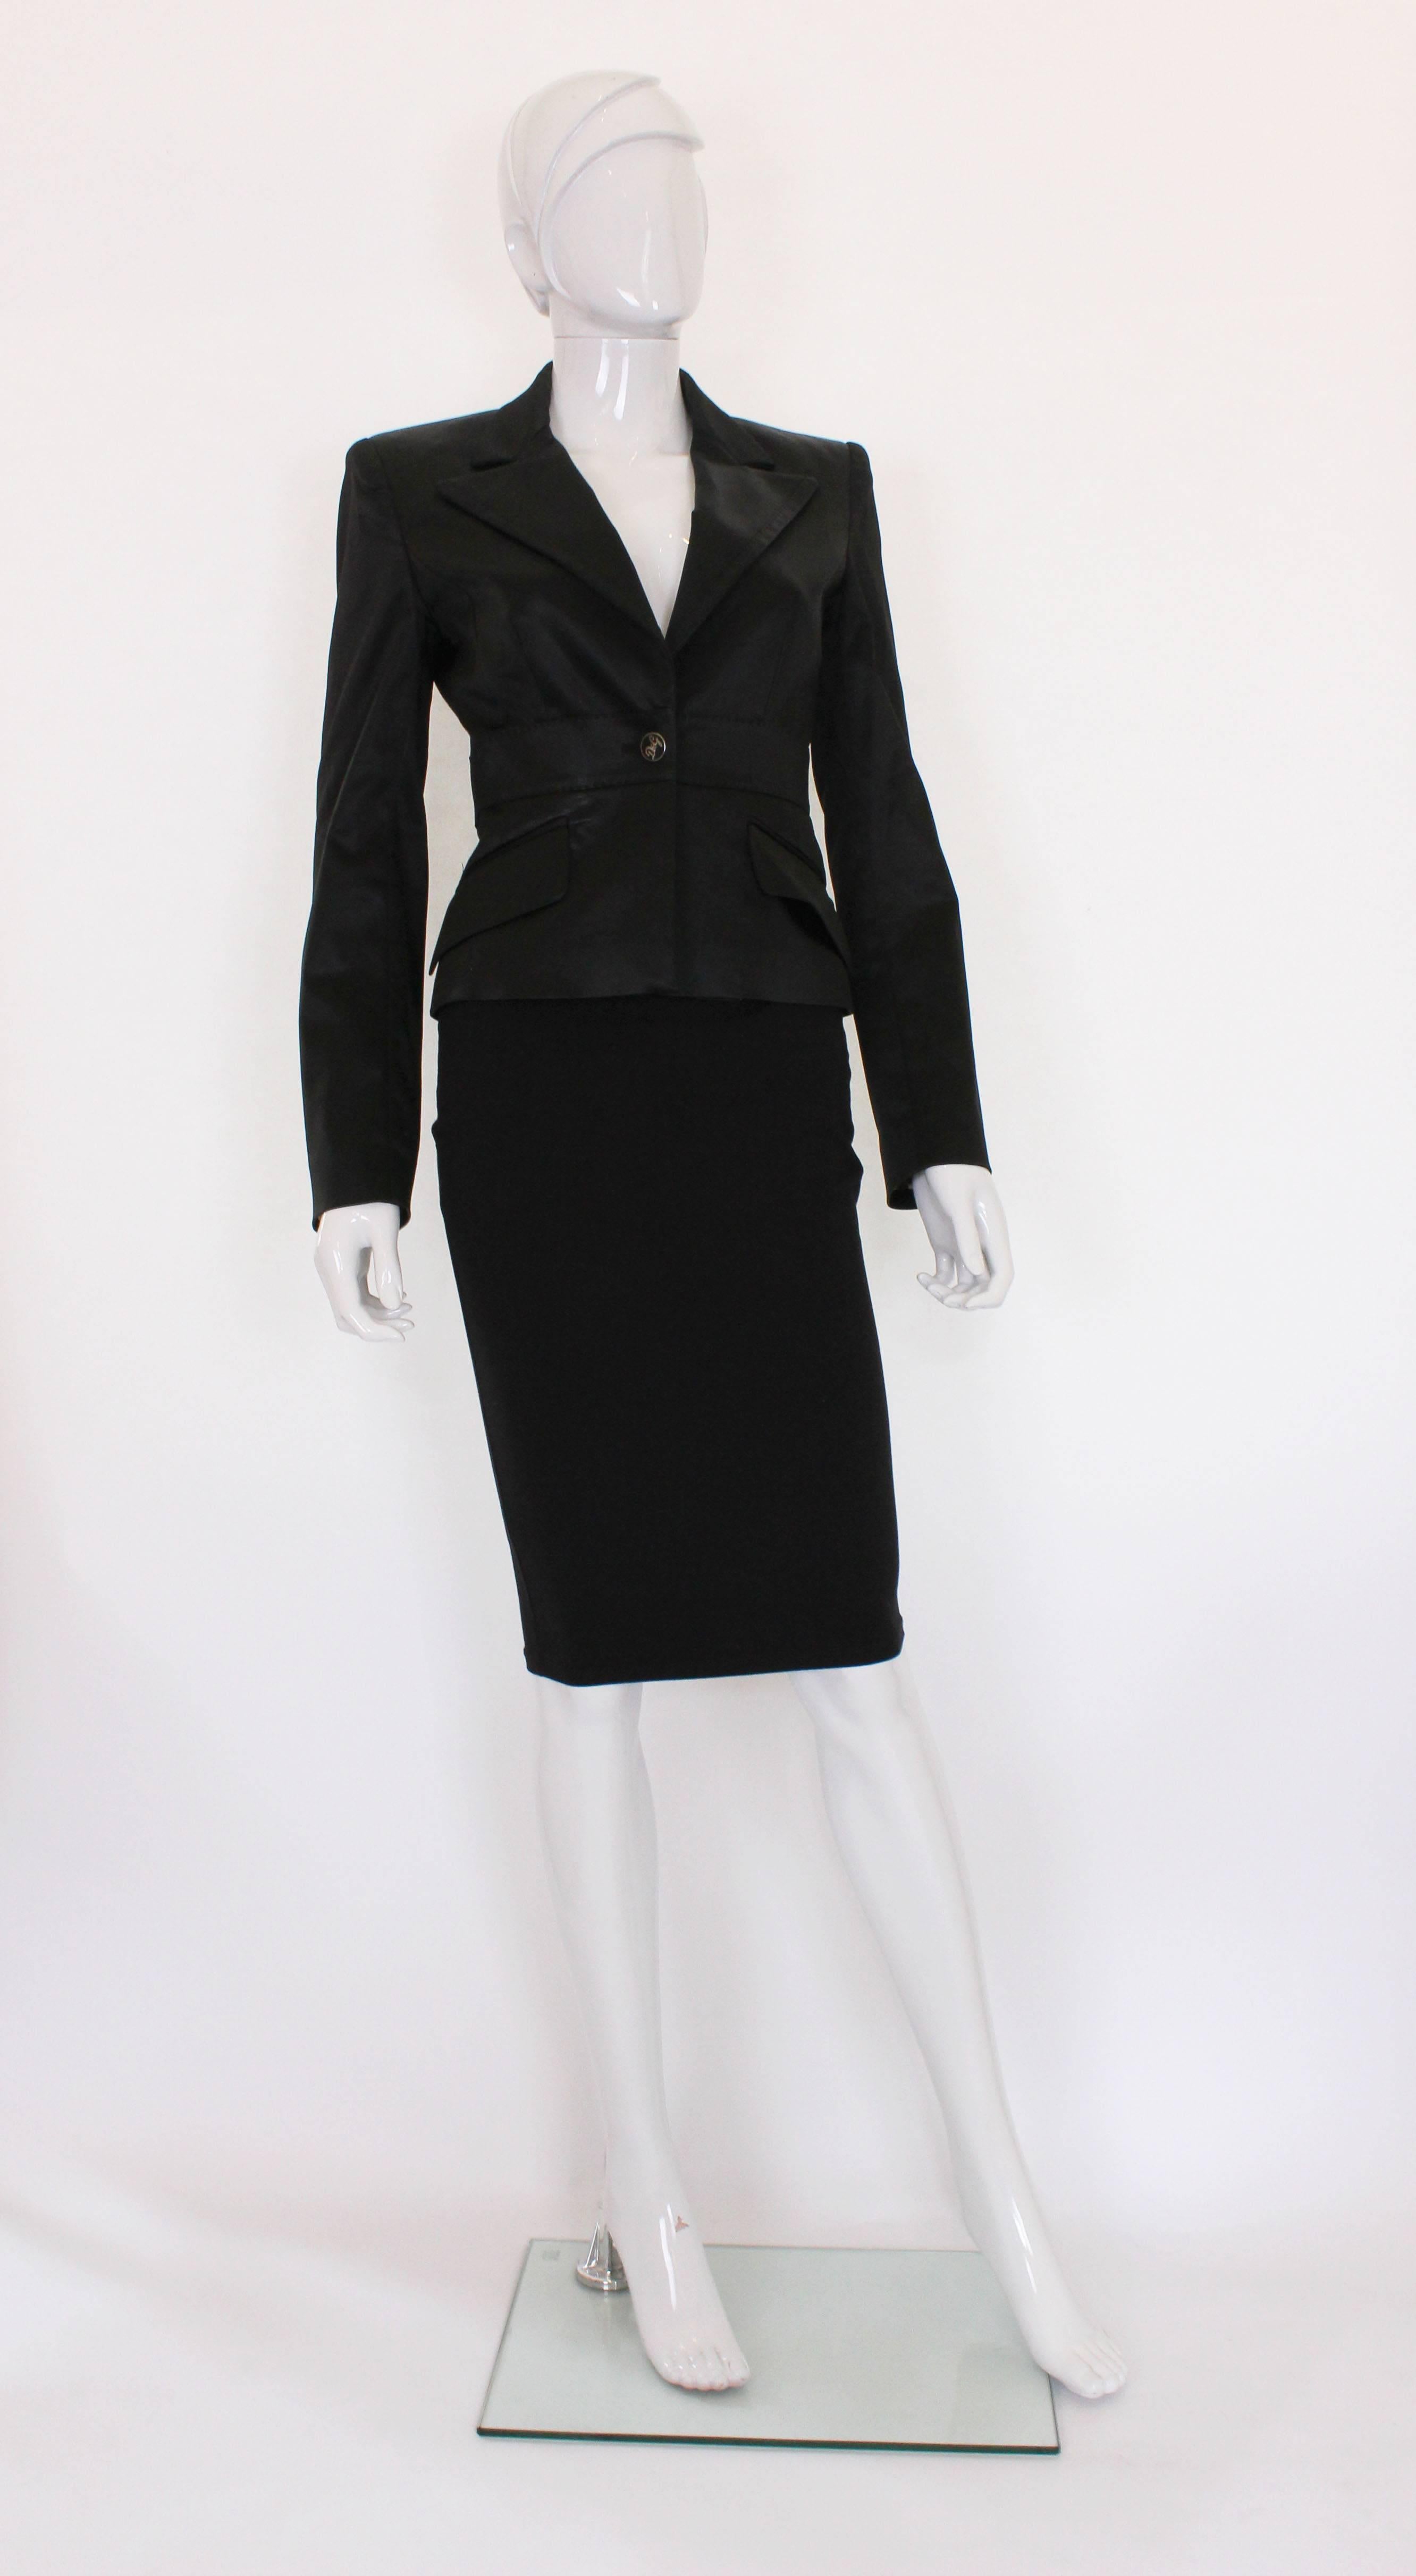 
A chic evening jacket from Italian design team, Dolce and Gabbana.In a black satin like fabric,this jacket has a cutaway collar with stitch detail,2 waist leval pockets , a central button fastening and three buttons on each cuff.